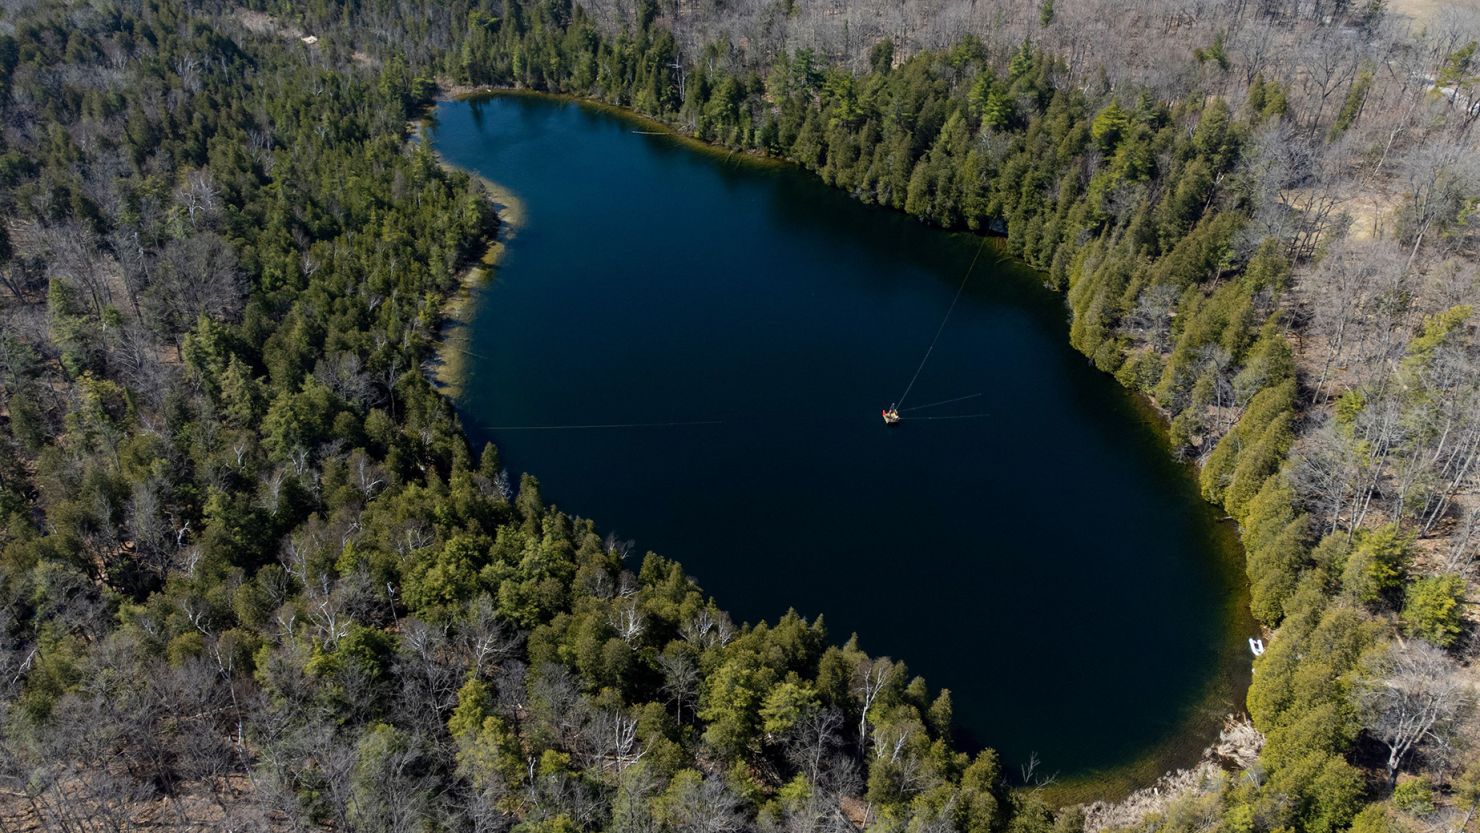 Crawford Lake in Ontario is the geological site that scientists identified as embodying the proposed Anthropocene Epoch, according to a July 2023 announcement.